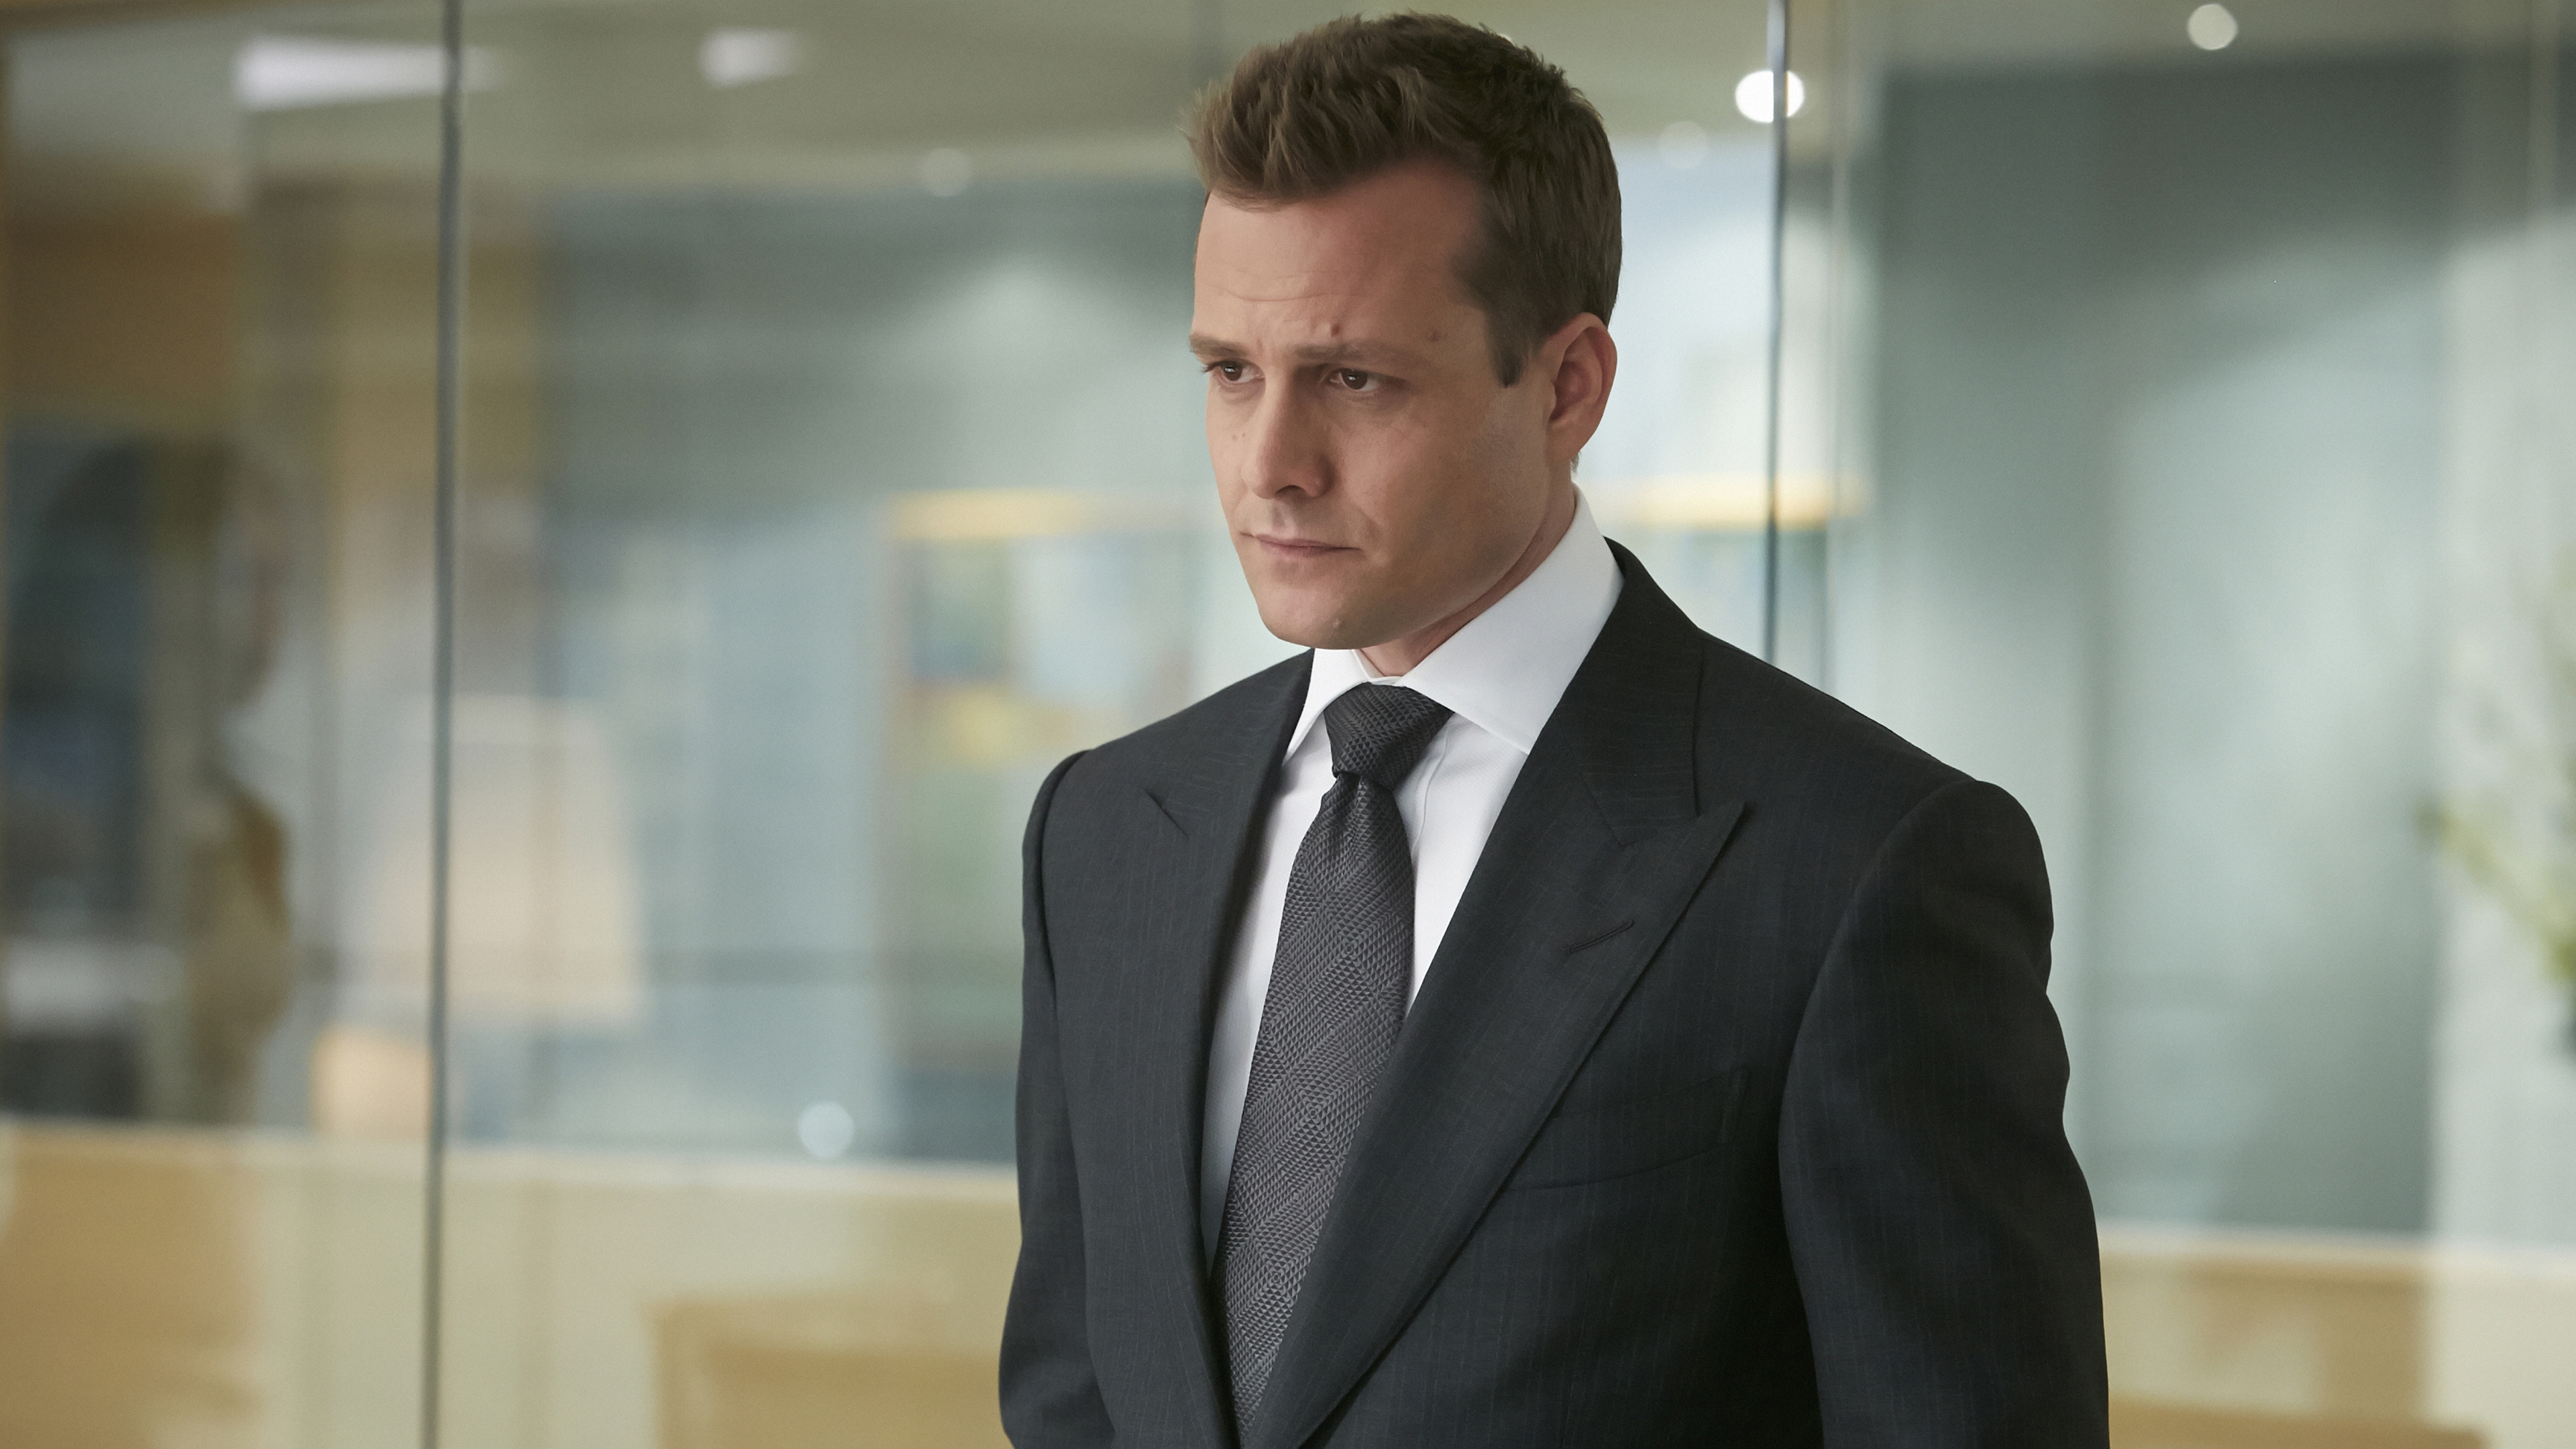 Harvey Specter Suits for 3840 x 2160 Ultra HD resolution